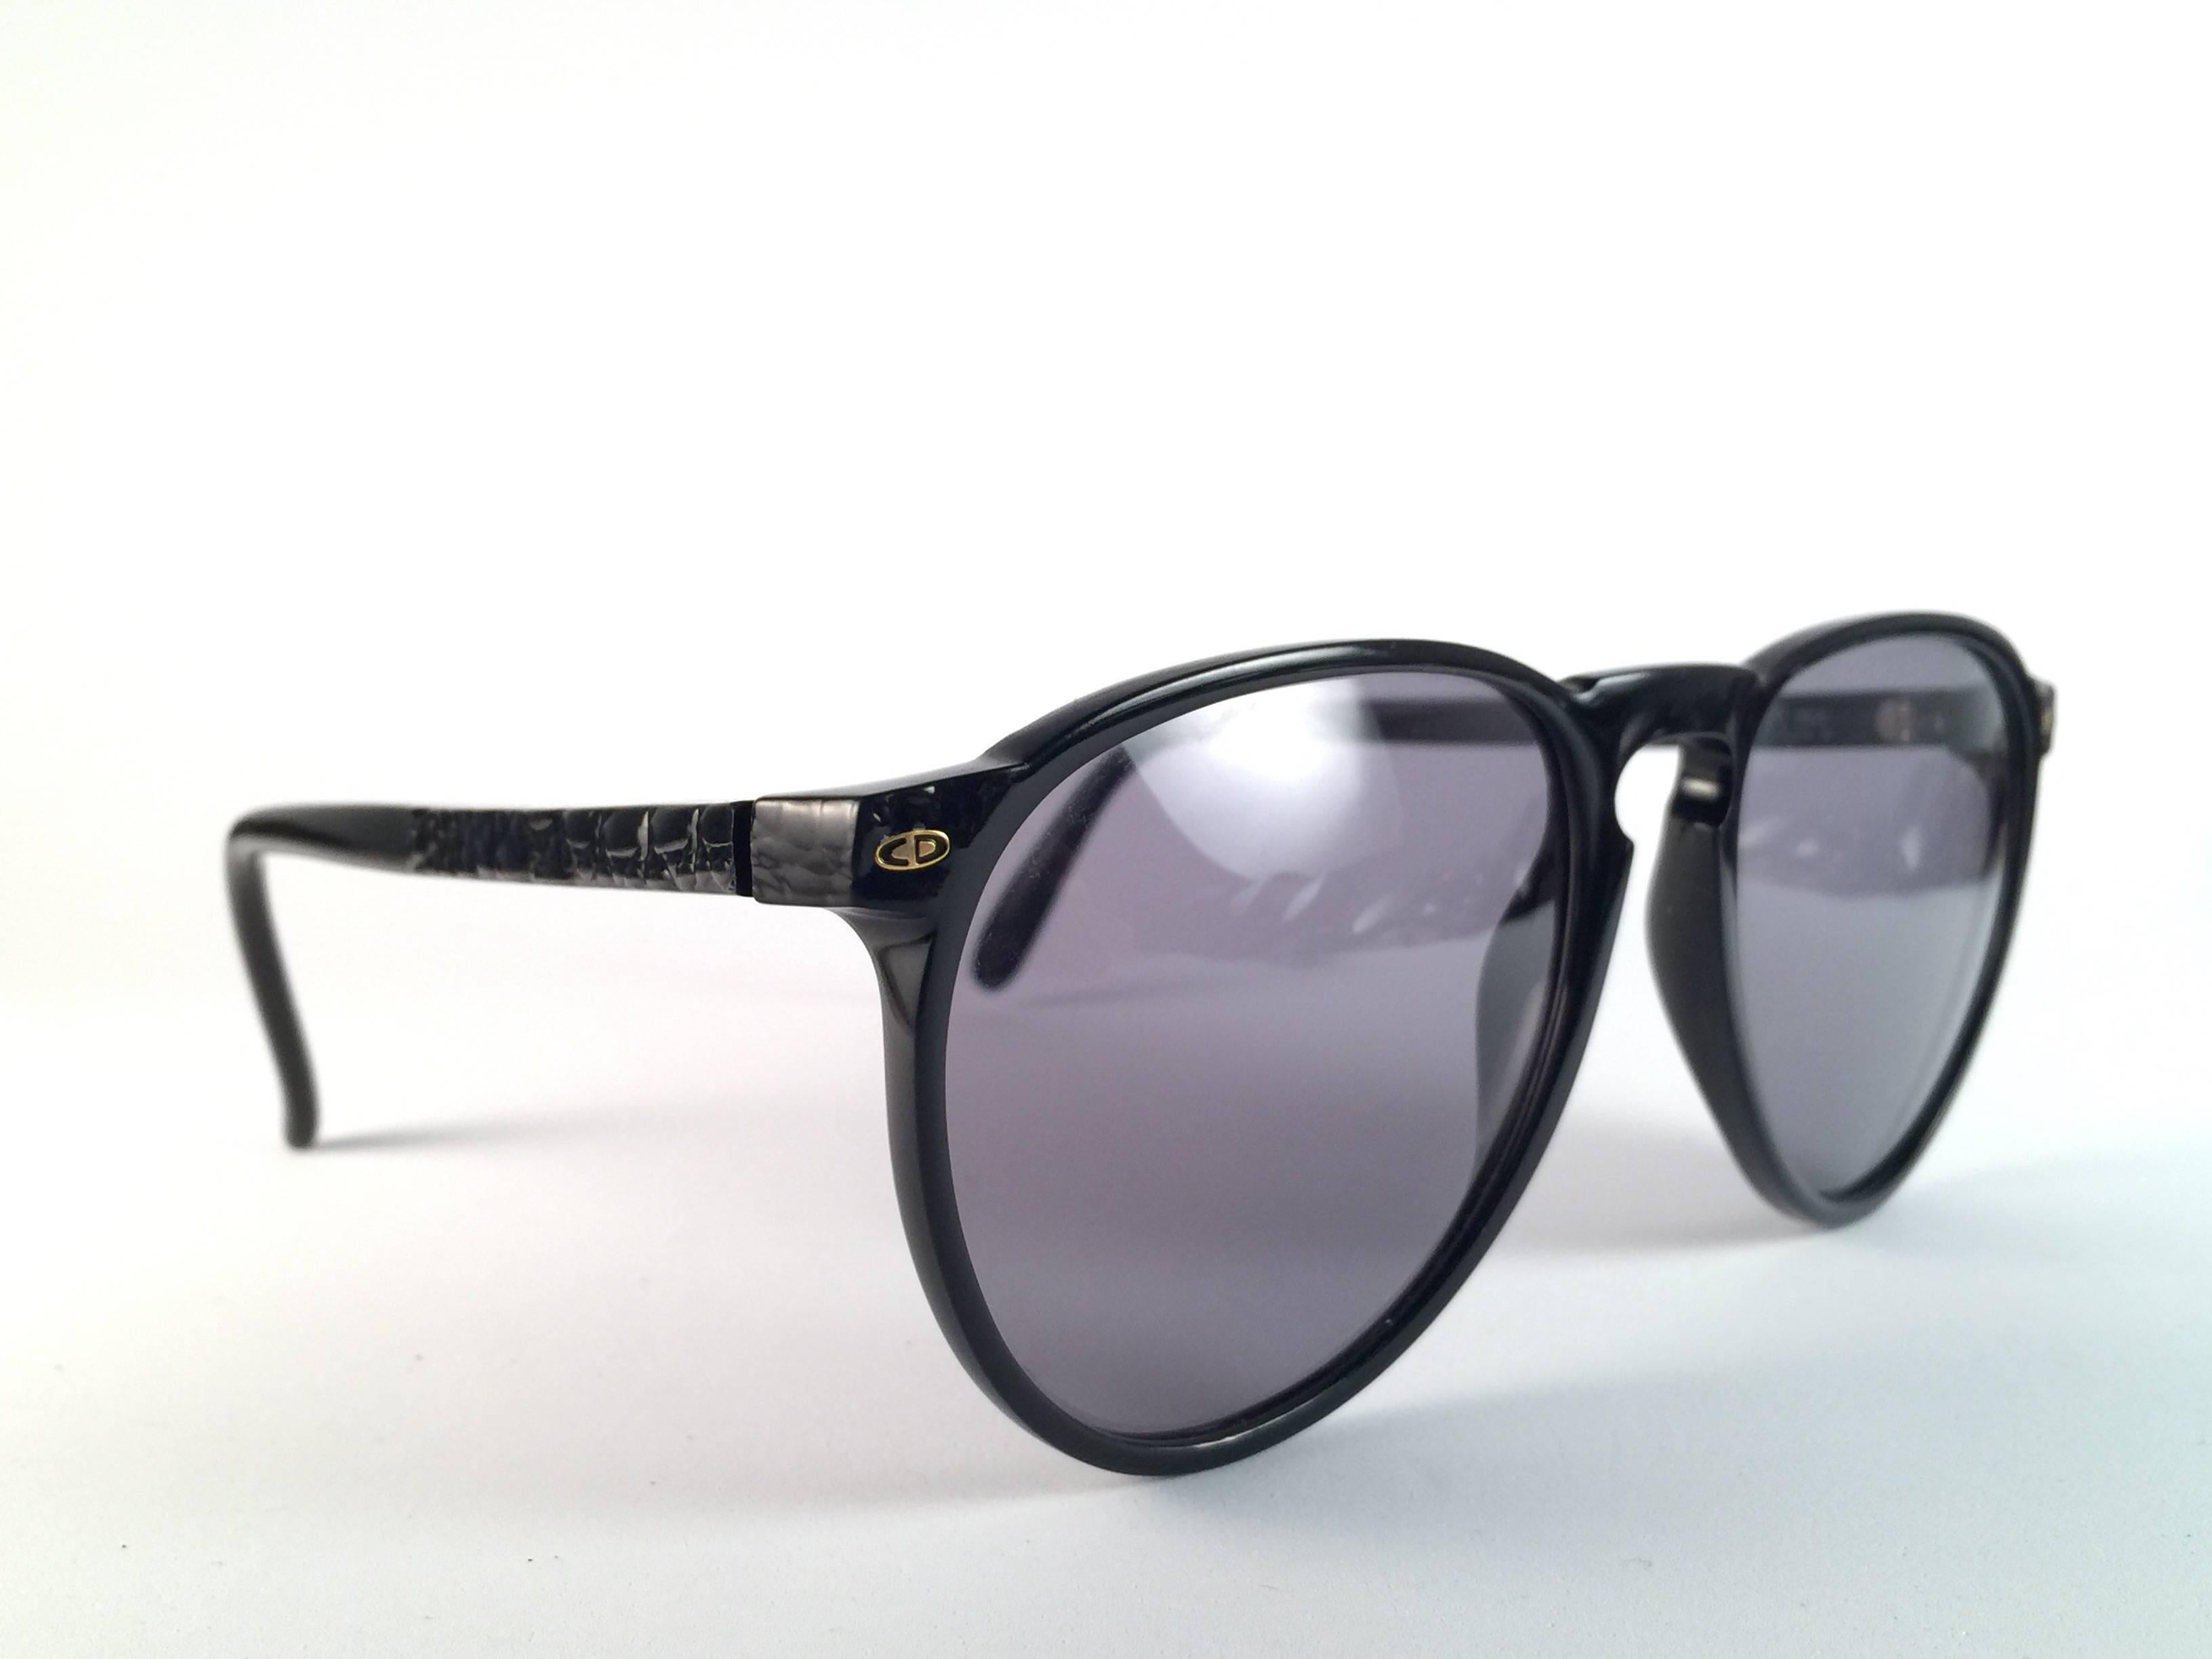 New Vintage Christian Dior Monsieur 2315 Optyl Black 1970's Austria  

New Vintage Christian Dior 1970's Sunglasses oversized black frame with spotless G15 grey lenses 1970’s made by Optyl.   
Manufactured in Austria  
New! never worn or displayed. 